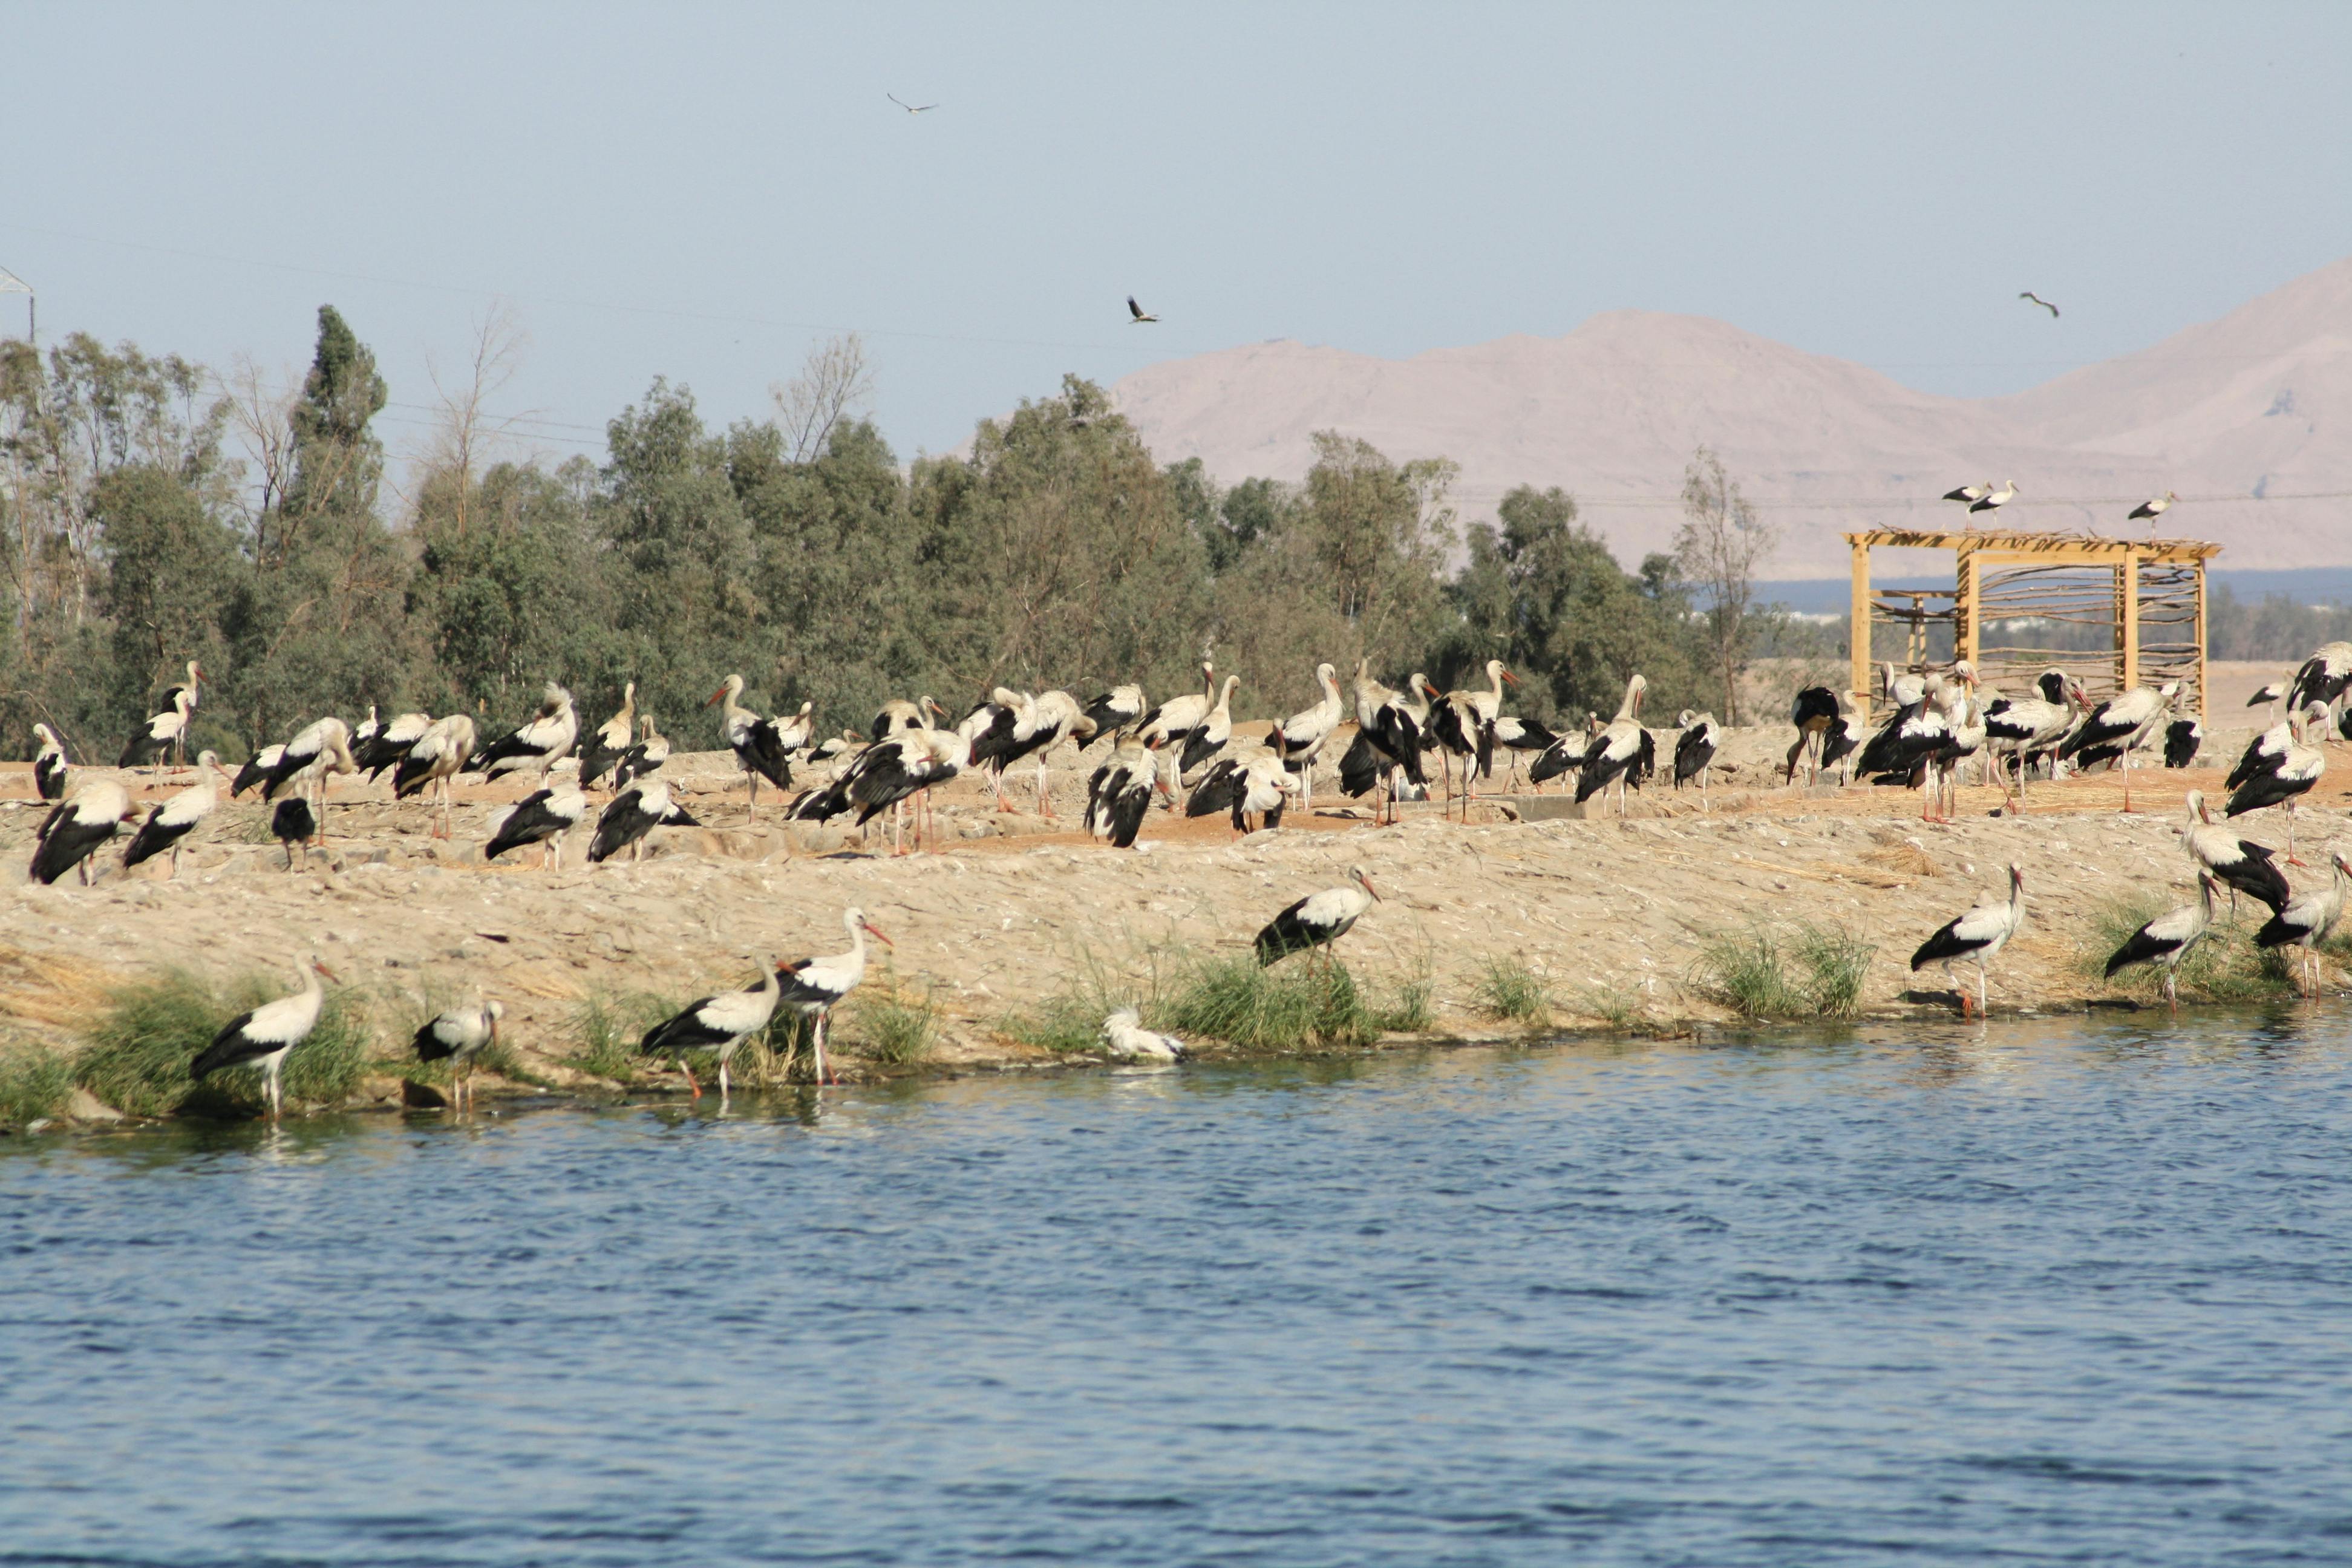 Bird watching with sand buggy experience in Sharm